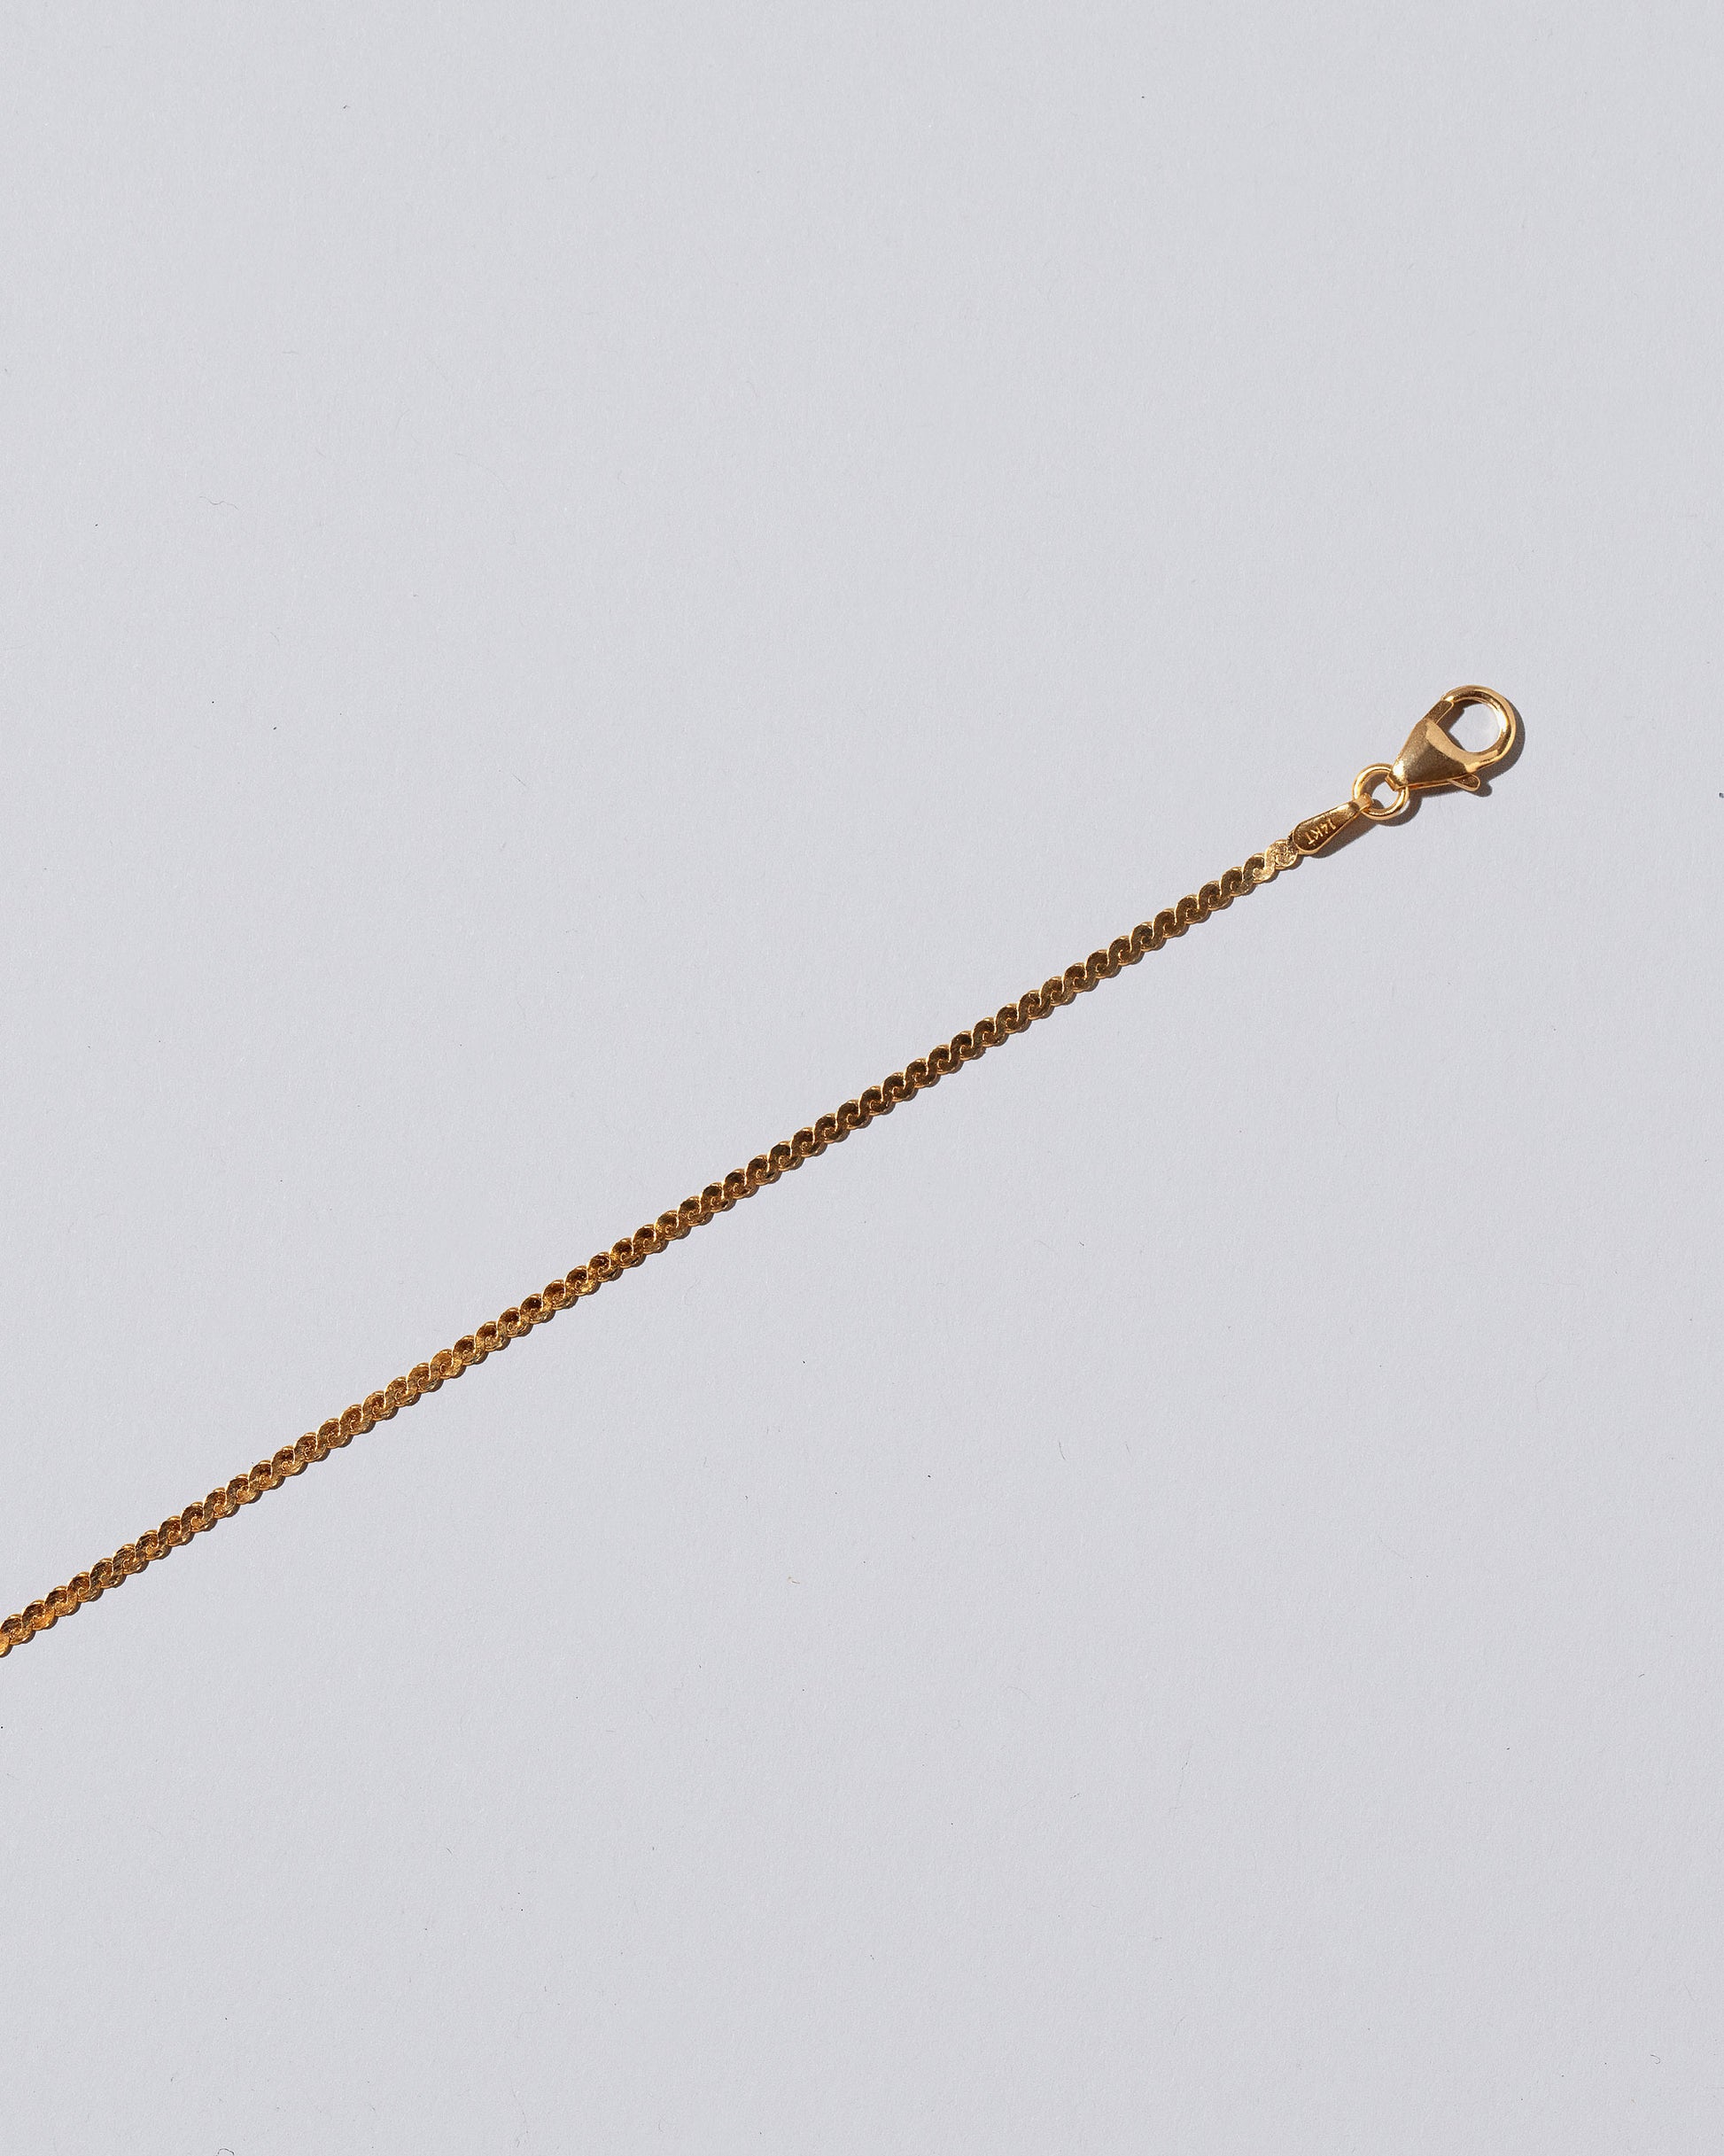 Closeup detail of the Yellow Gold Serpentina Chain Necklace on light color background.